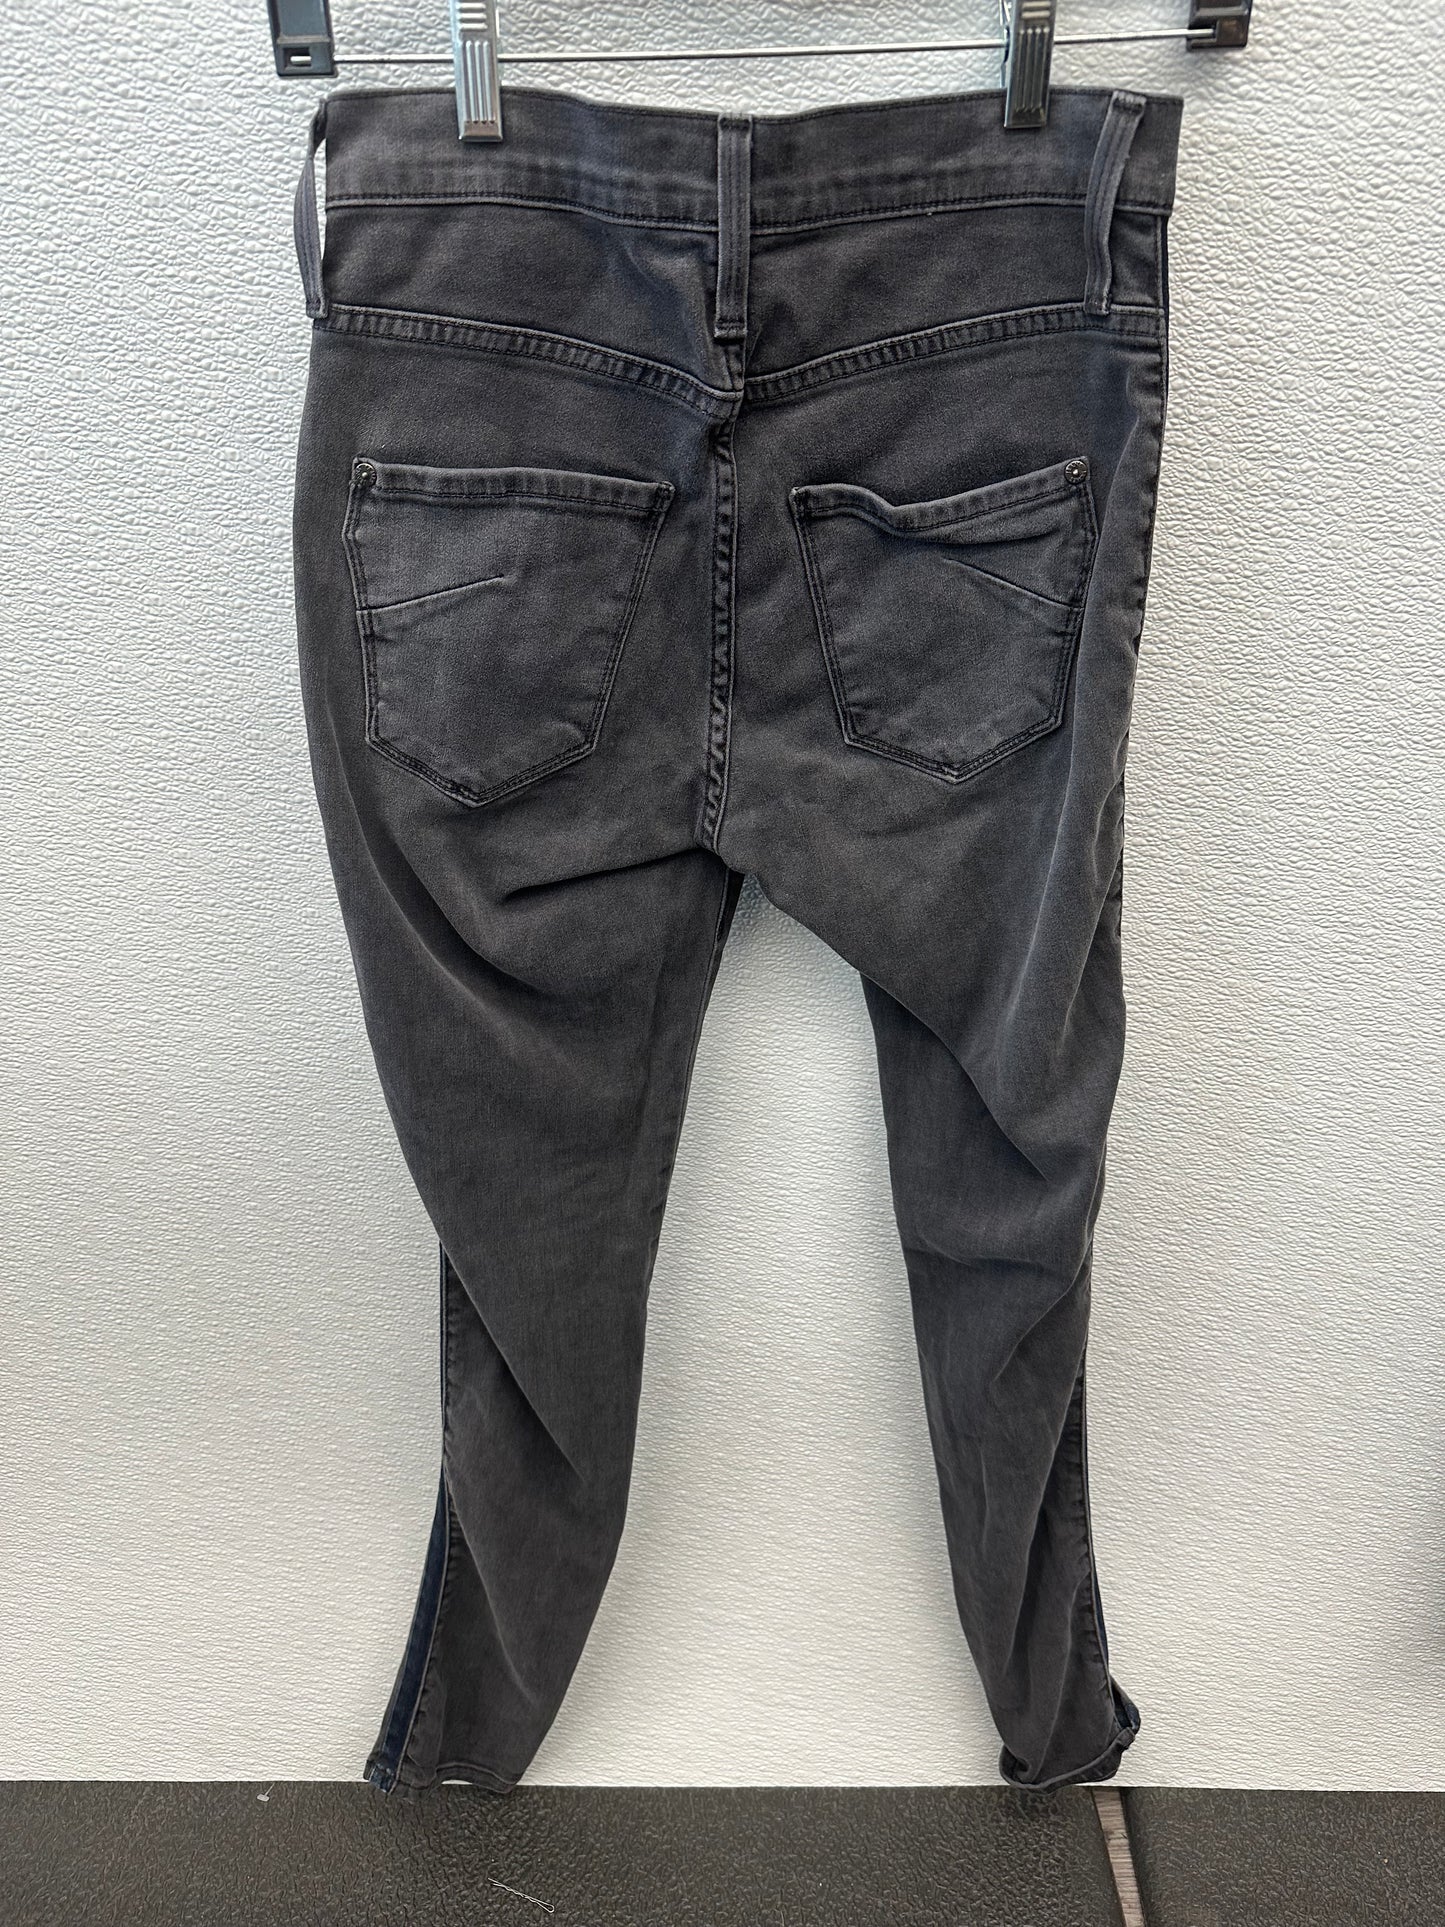 Jeans Skinny By James Jeans  Size: 0